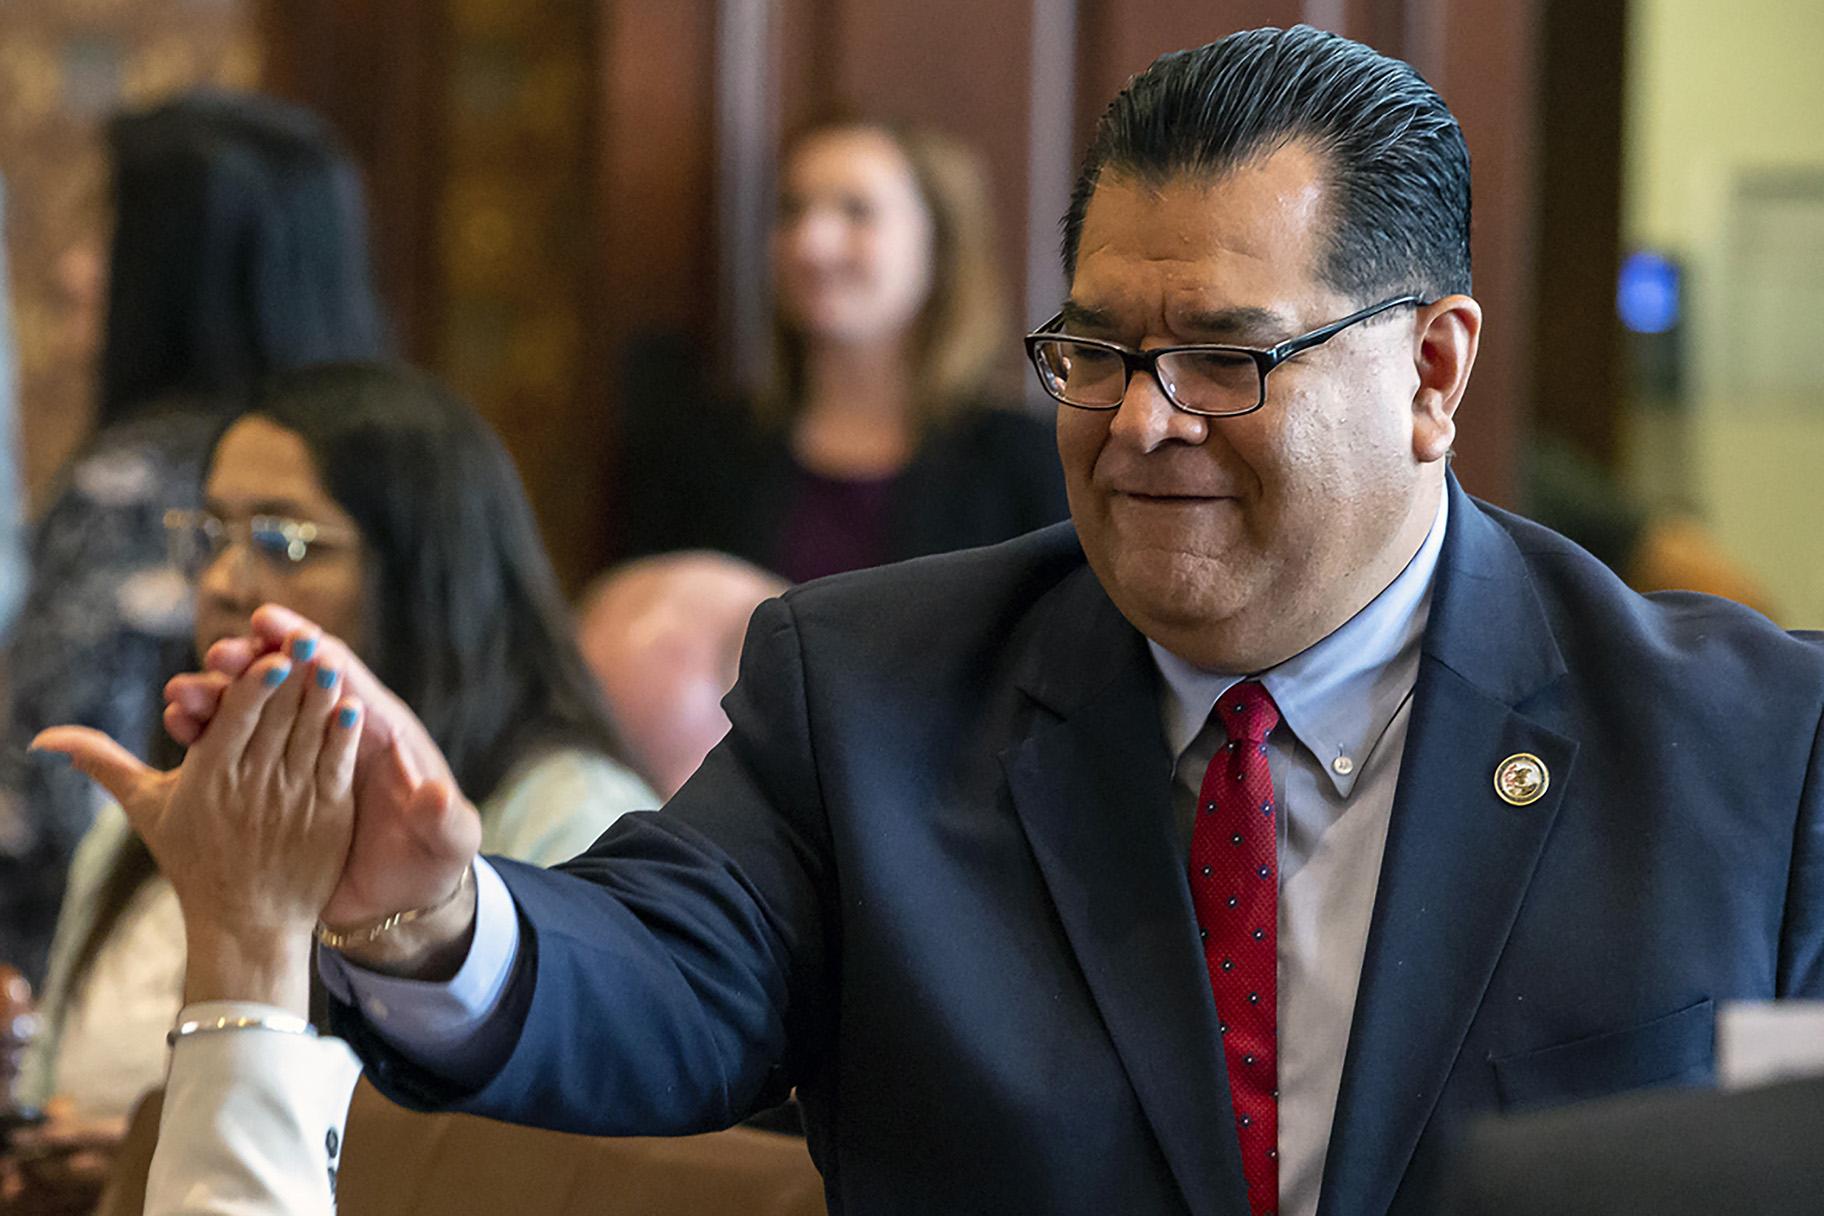 This June 2, 2019 file photo shows Illinois state Sen. Martin Sandoval, D-Chicago, at the Illinois State Capitol in Springfield, Ill. (Justin L. Fowler / The State Journal-Register via AP File)